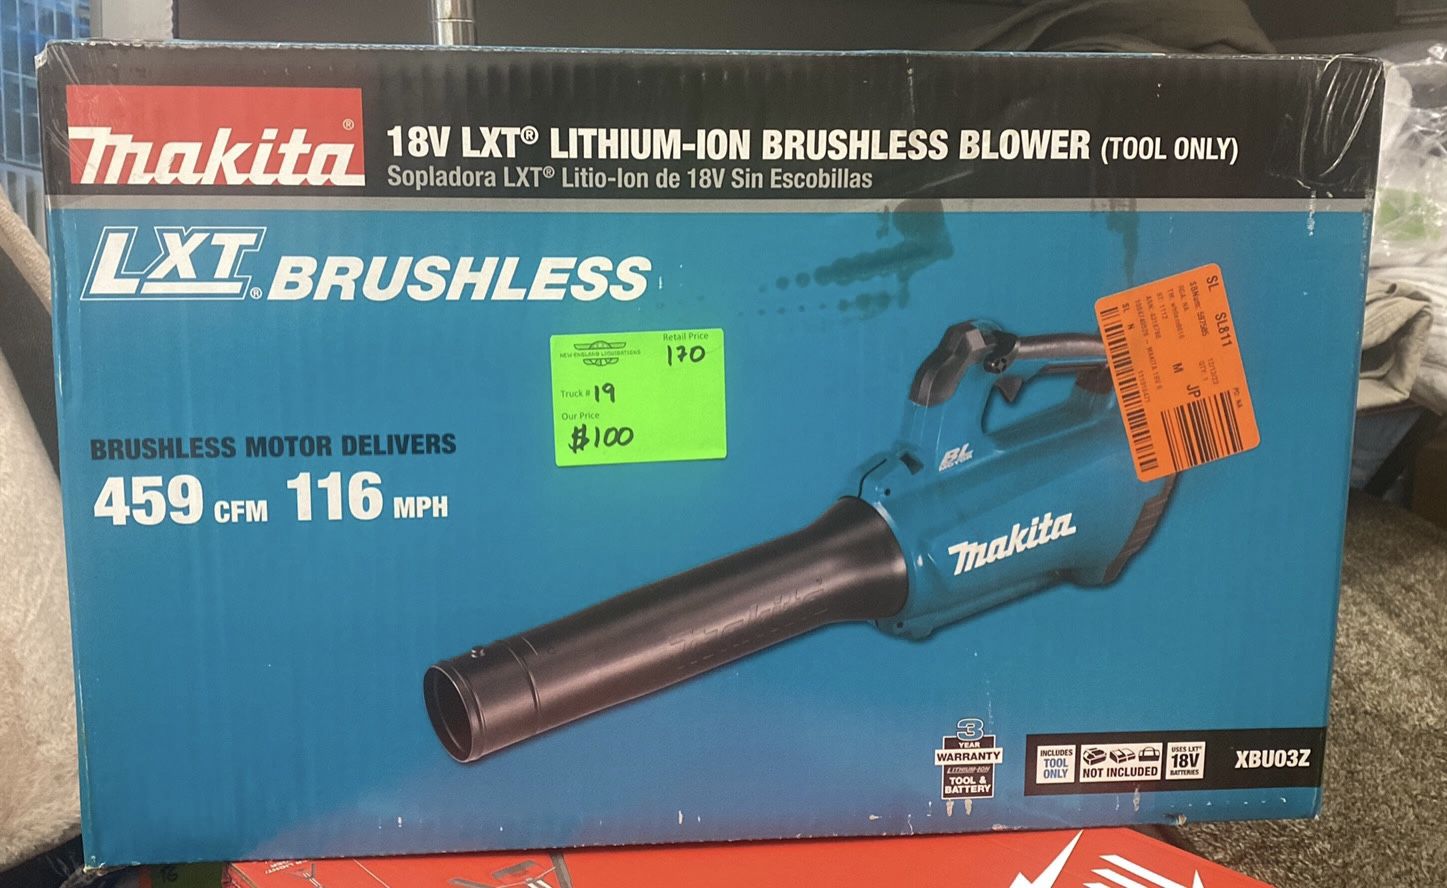 Makita 116 MPH 459 CFM 18V LXT Lithium-Ion Brushless Cordless Leaf Blower (Tool-Only) 